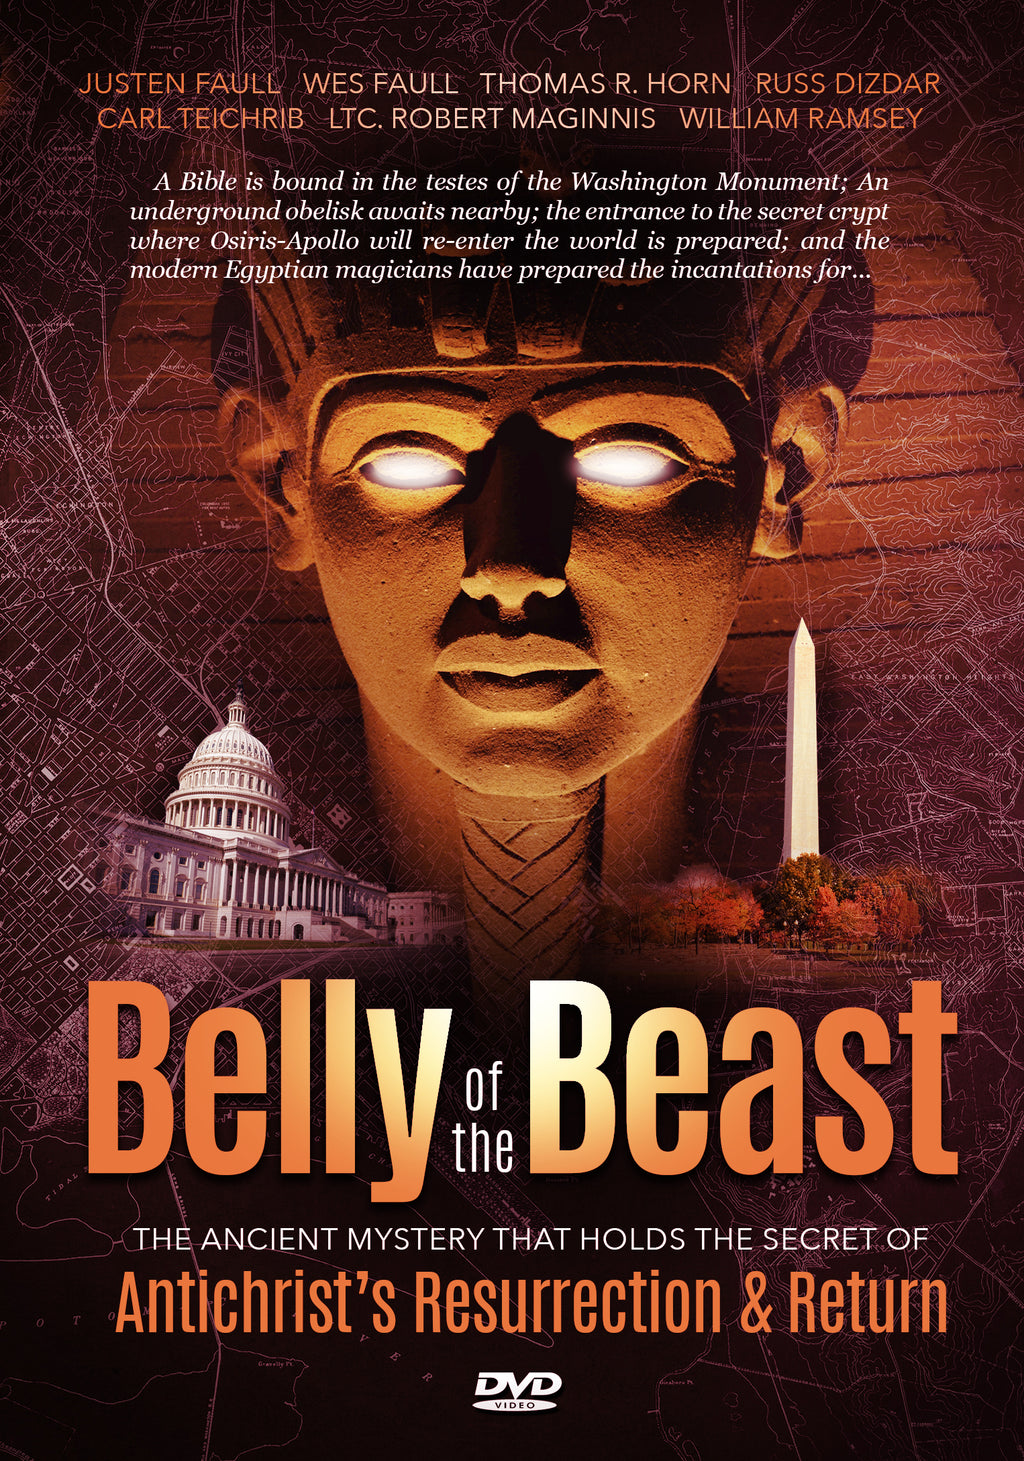 BELLY OF THE BEAST: THE ANCIENT MYSTERY THAT HOLDS THE SECRET OF ANTICRIST'S RESURRECTION AND RETURN